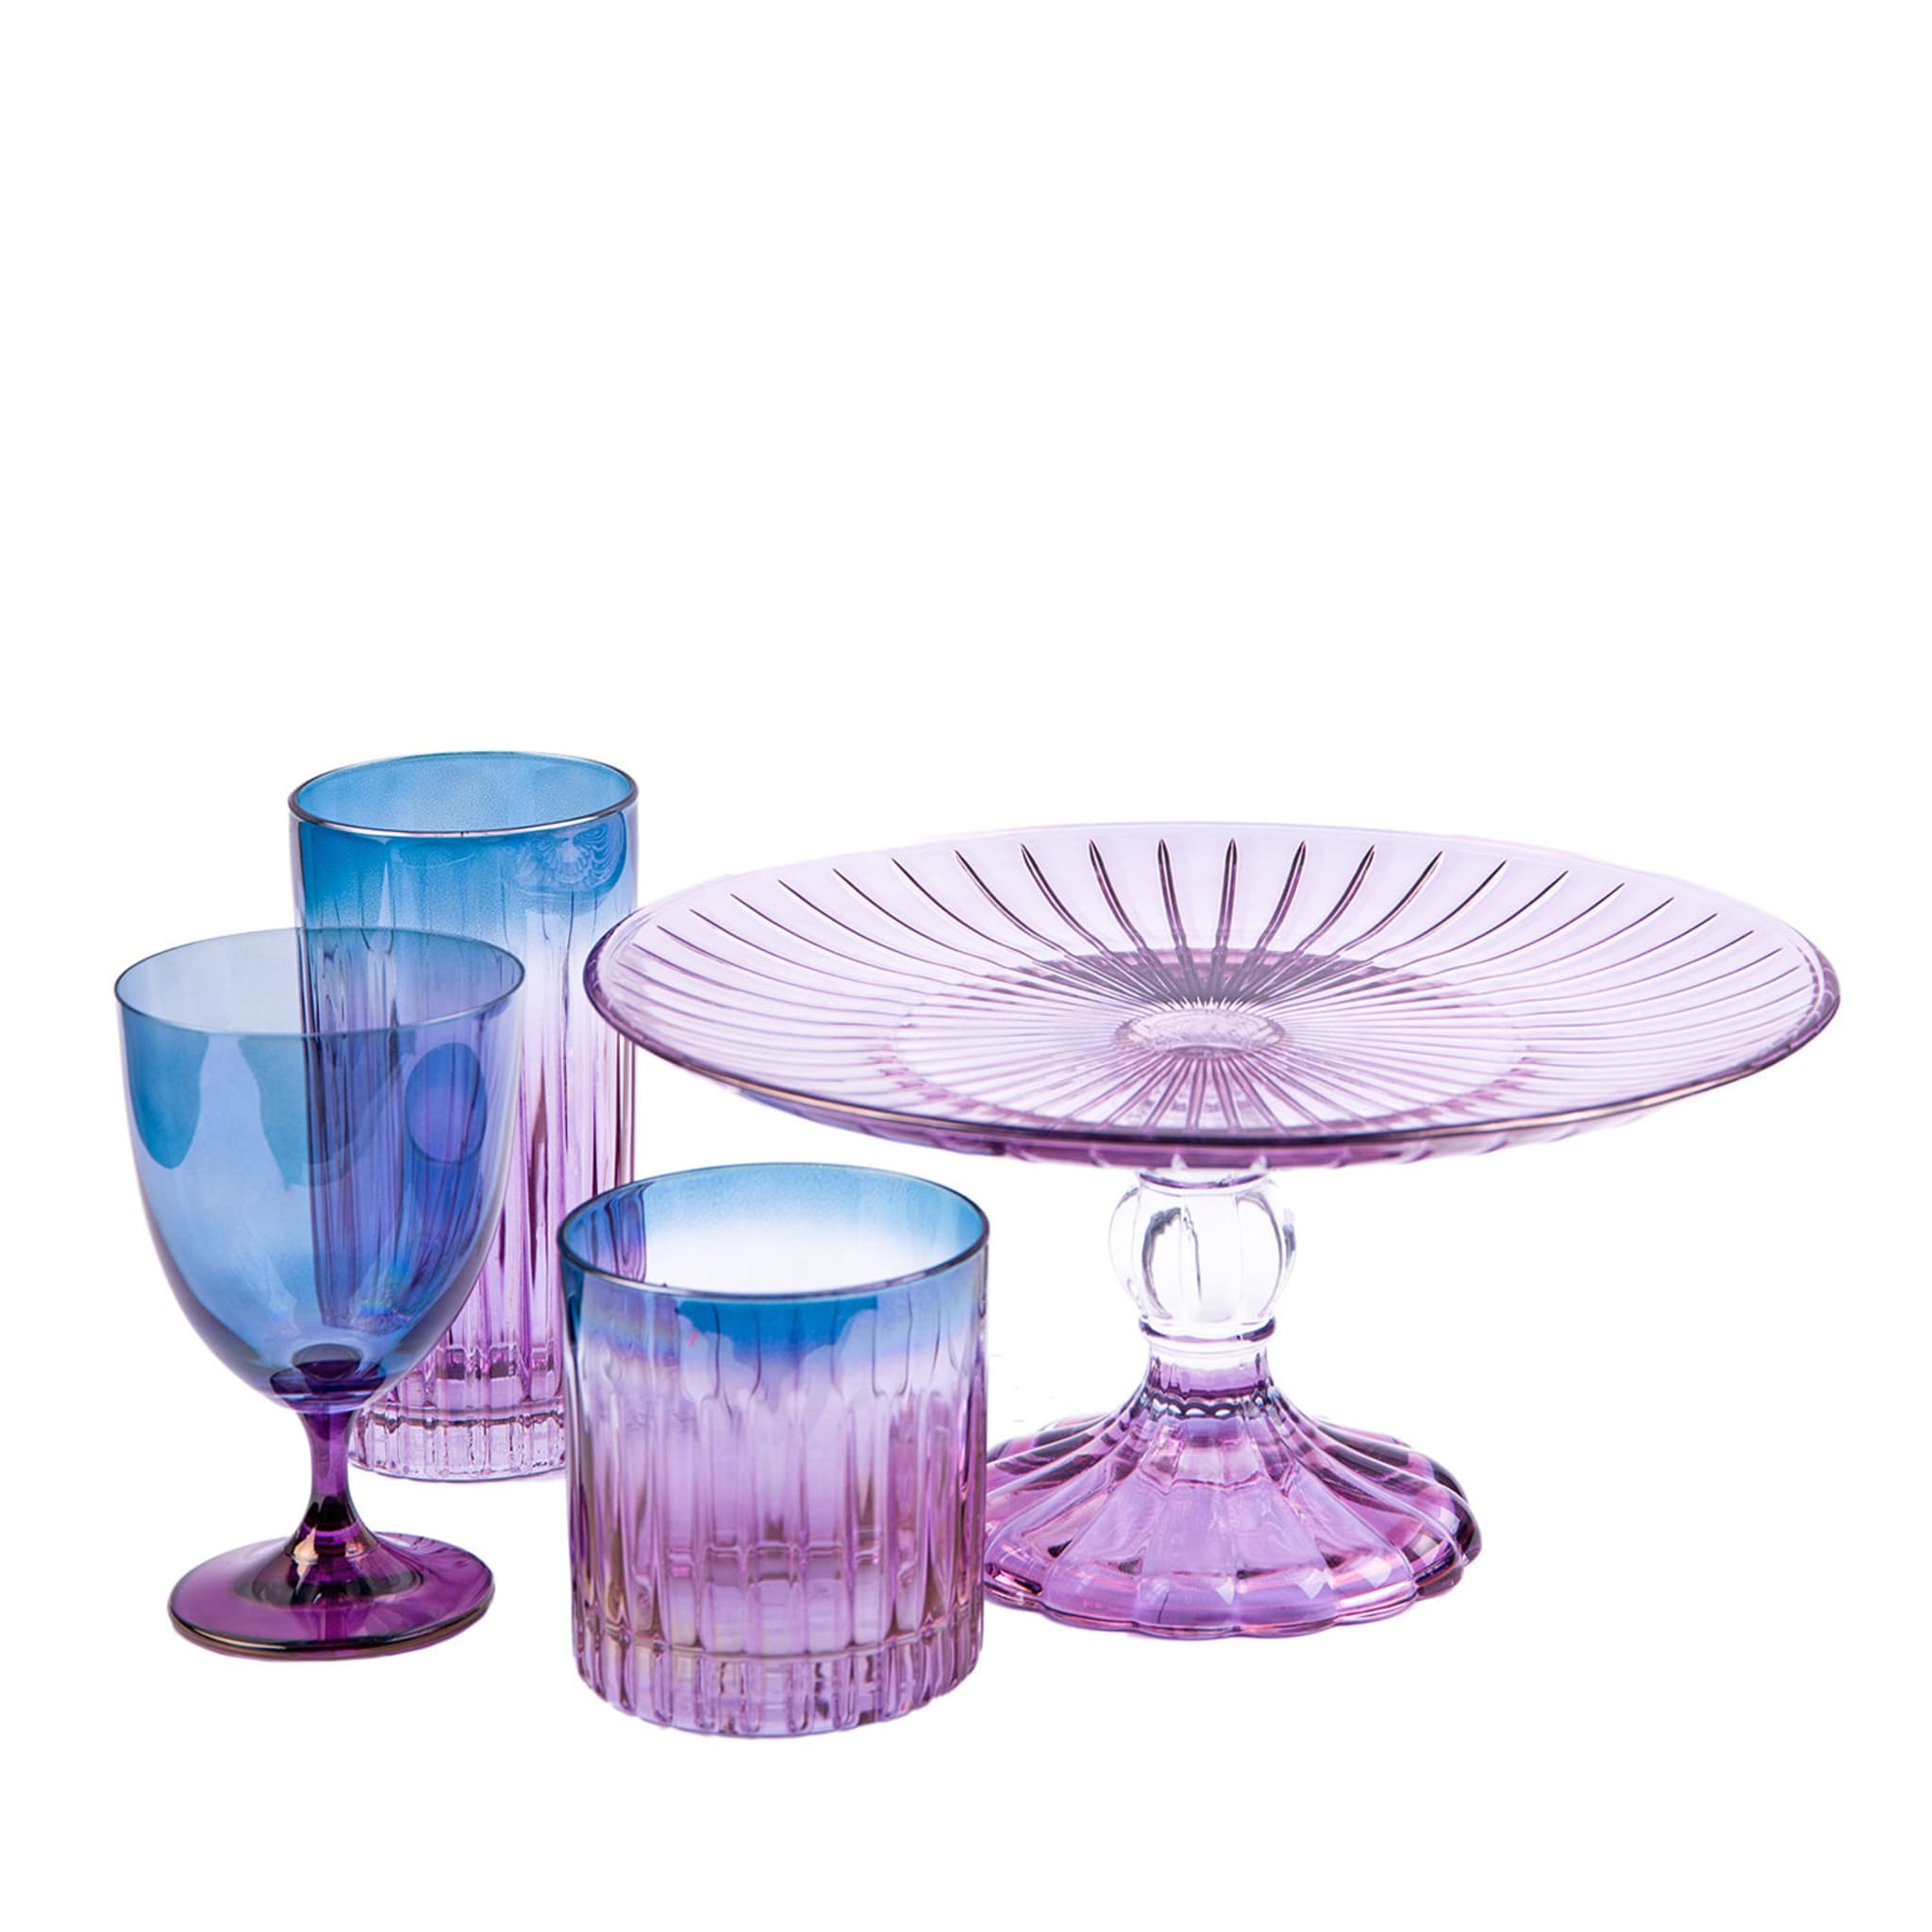 Fleury Set of 2 Purple-To-Blue Water Goblets - Alternative view 2